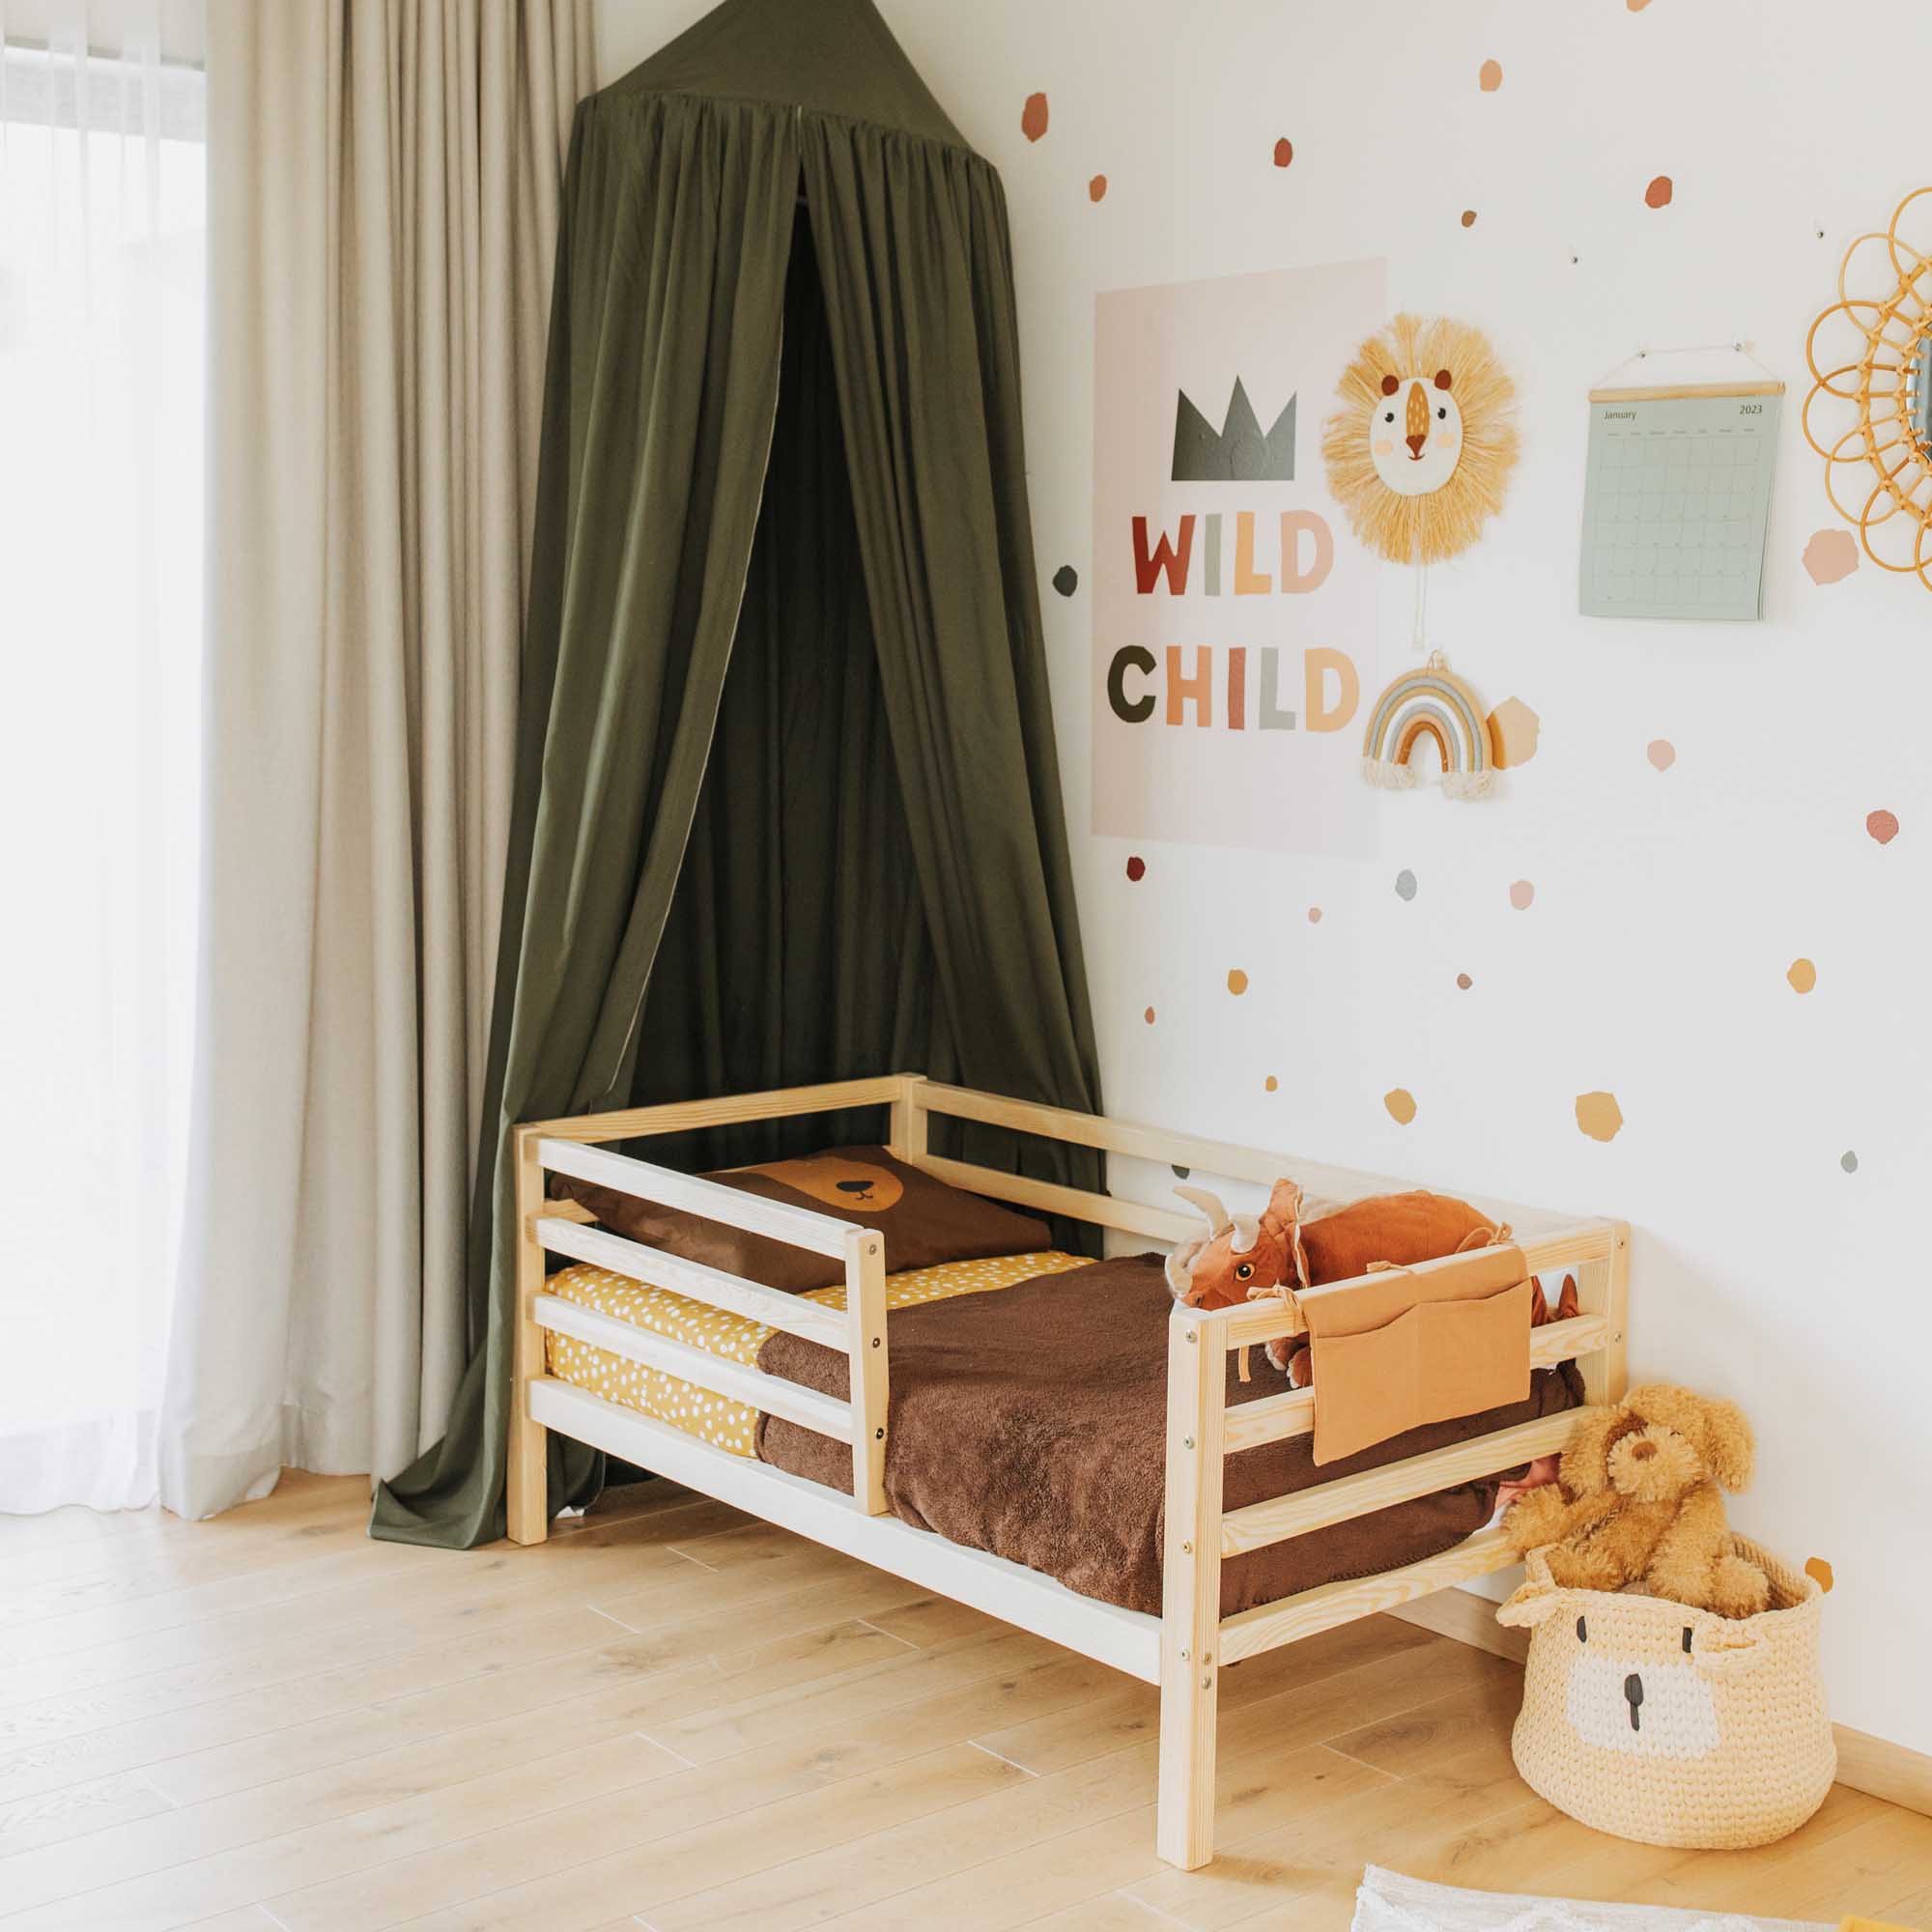 A child's room with a canopy and teddy bears.